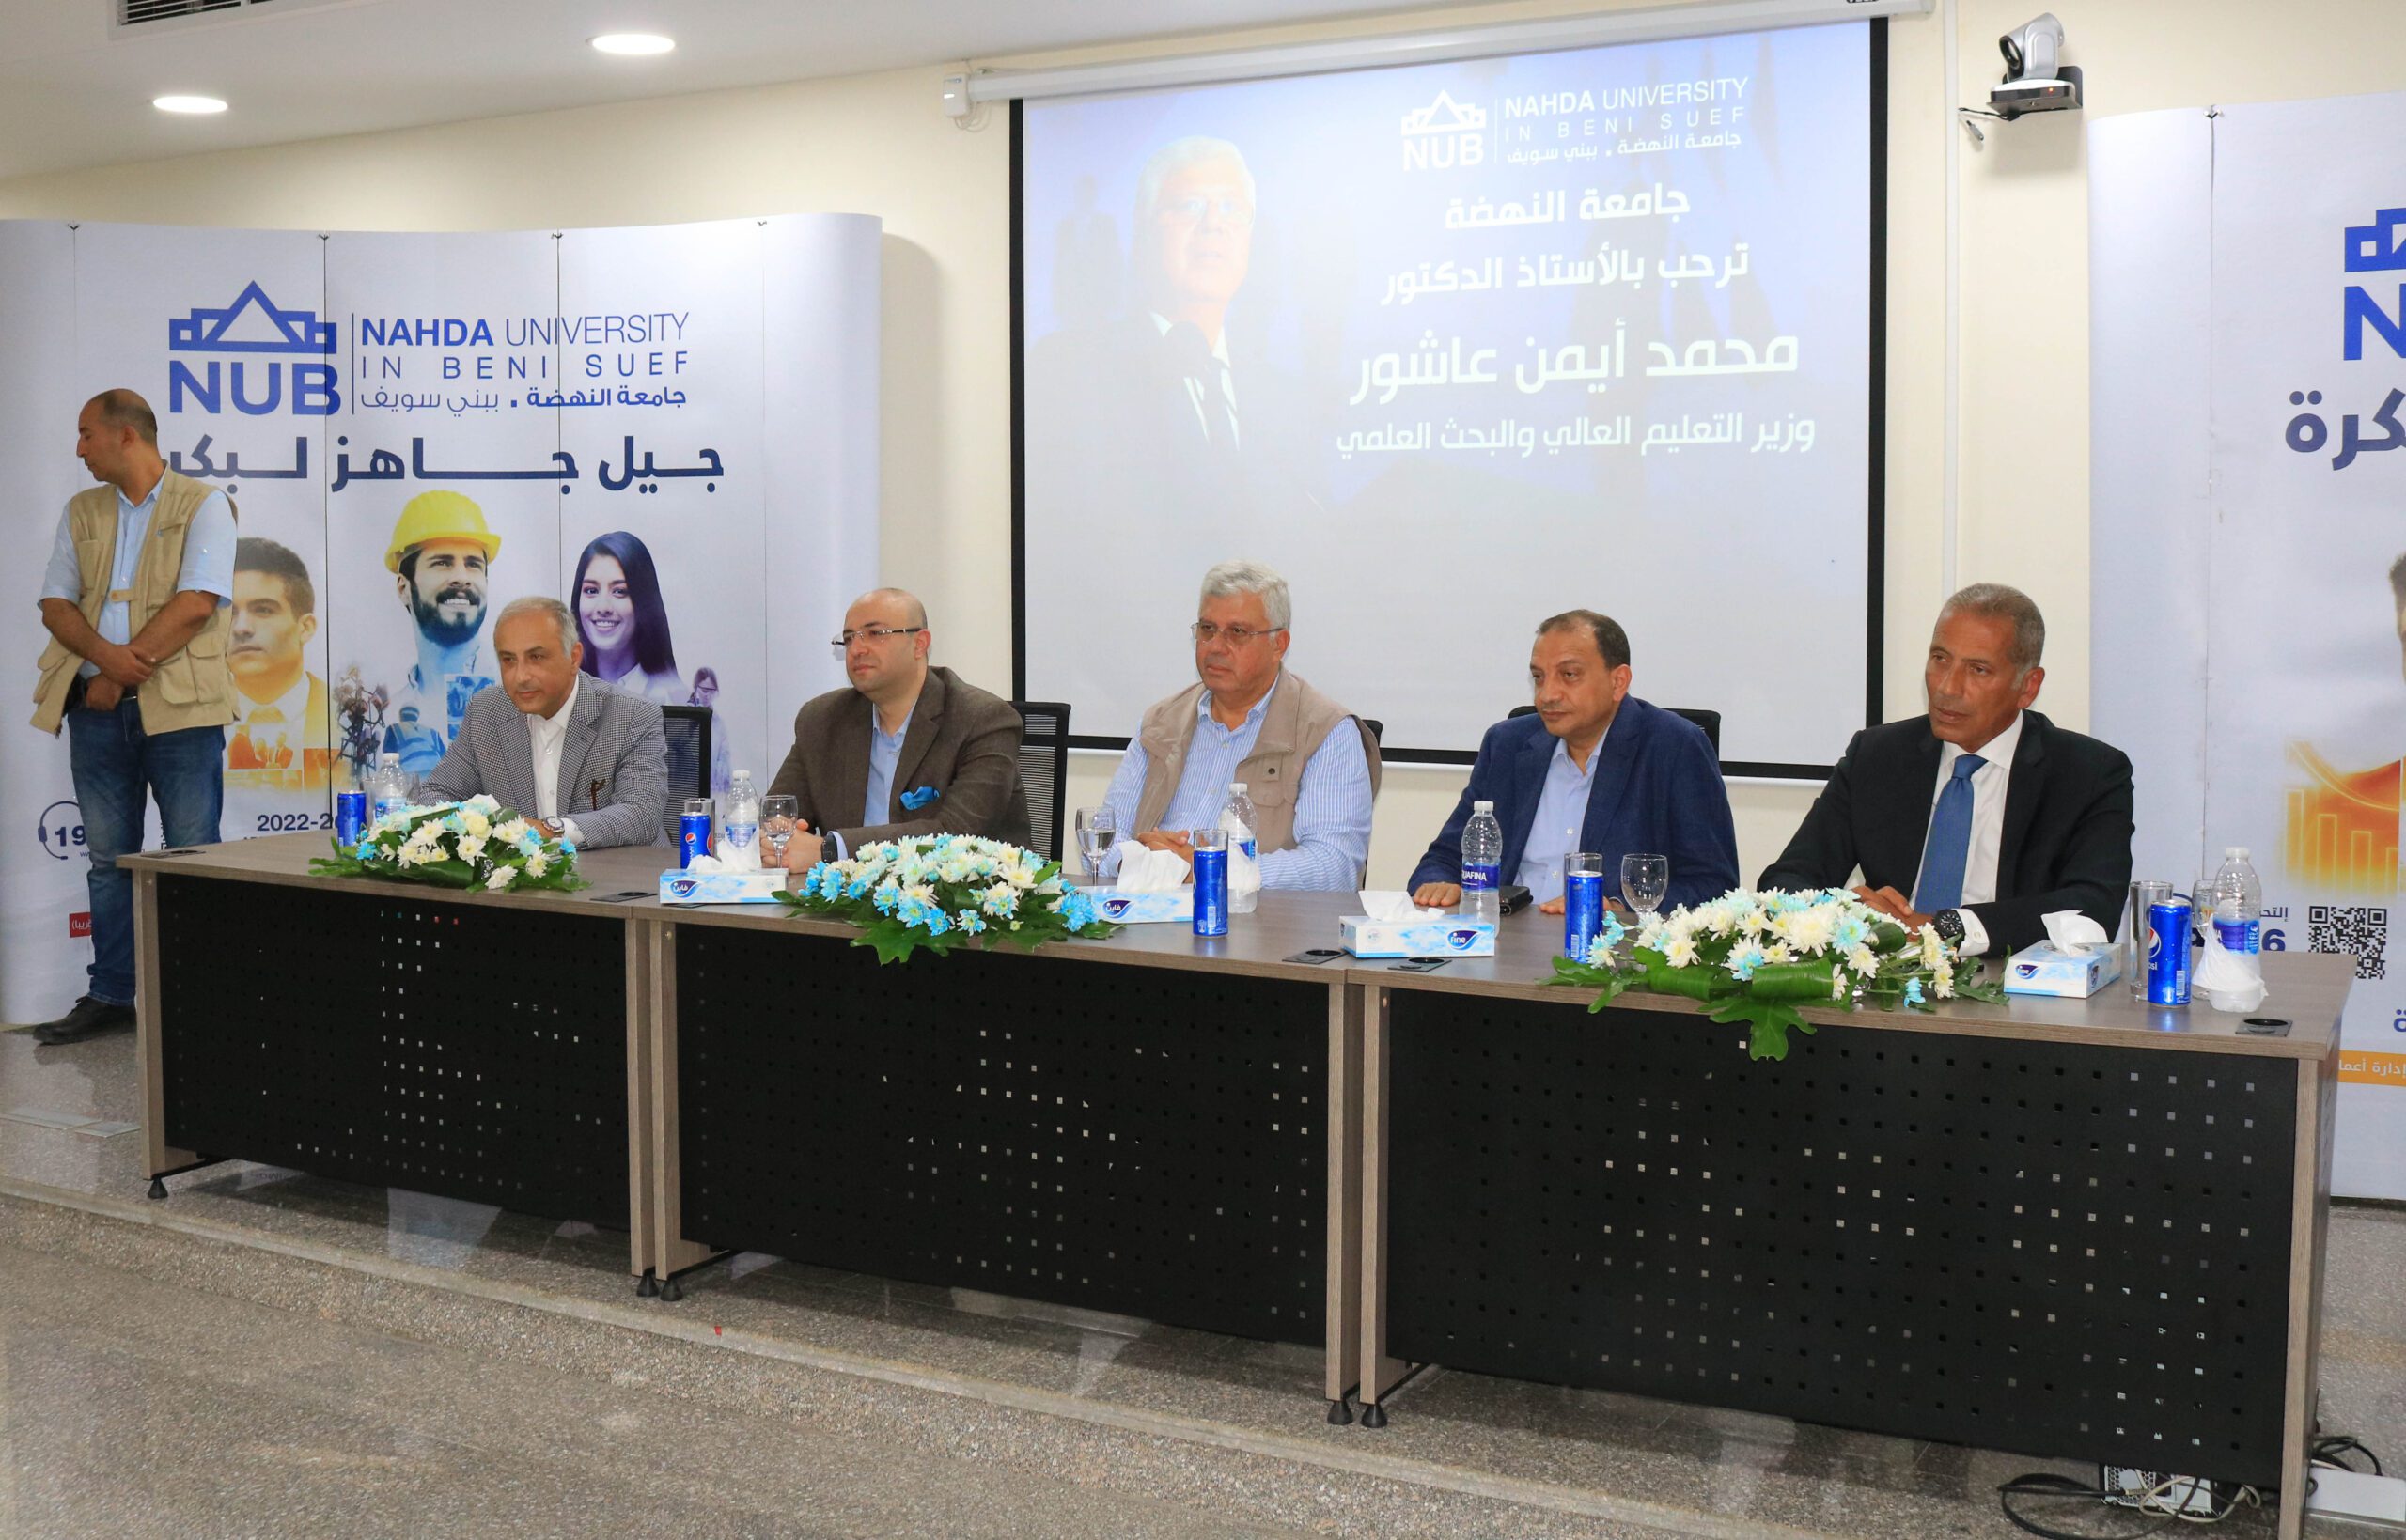 The Minister of Higher Education and Scientific Research inspects the faculties of Al-Nahda University and stresses their role in serving the higher education system in Egypt